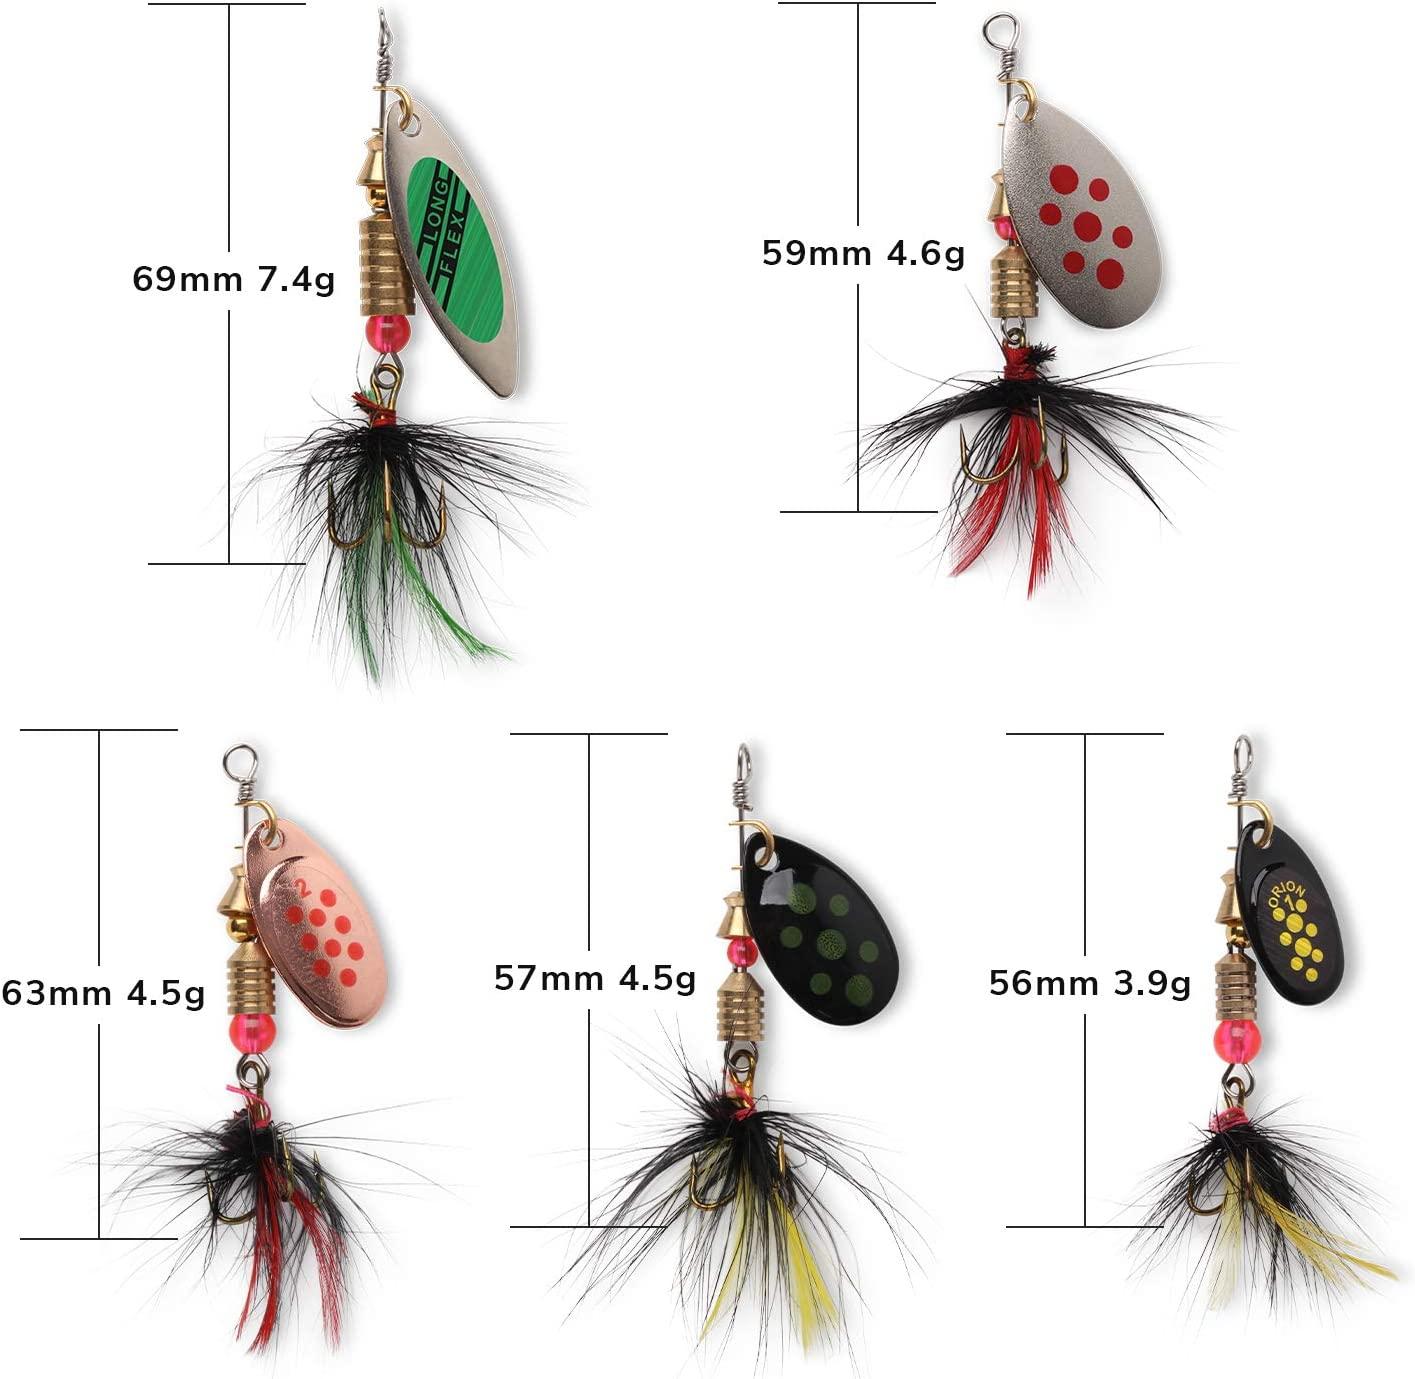 Fishing Lures Spinnerbait for Bass Trout Salmon Freshwater Saltwater  Fishing Hard Metal Spinner Baits Kit with Tackle Box /10 pcs 